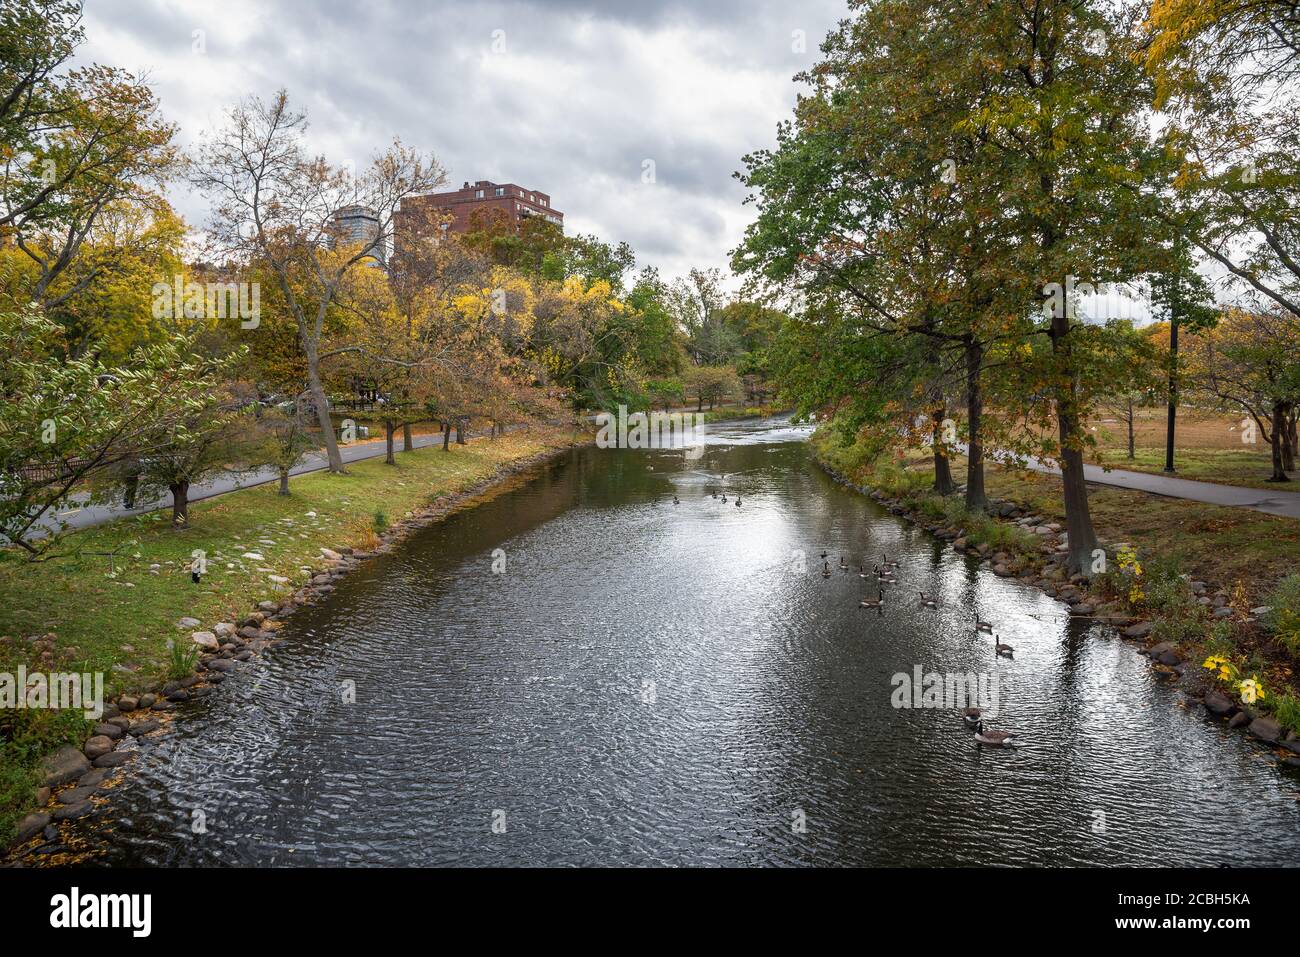 Canal lined with trees and paved paths in a public park under stom clouds on an autumn day Stock Photo